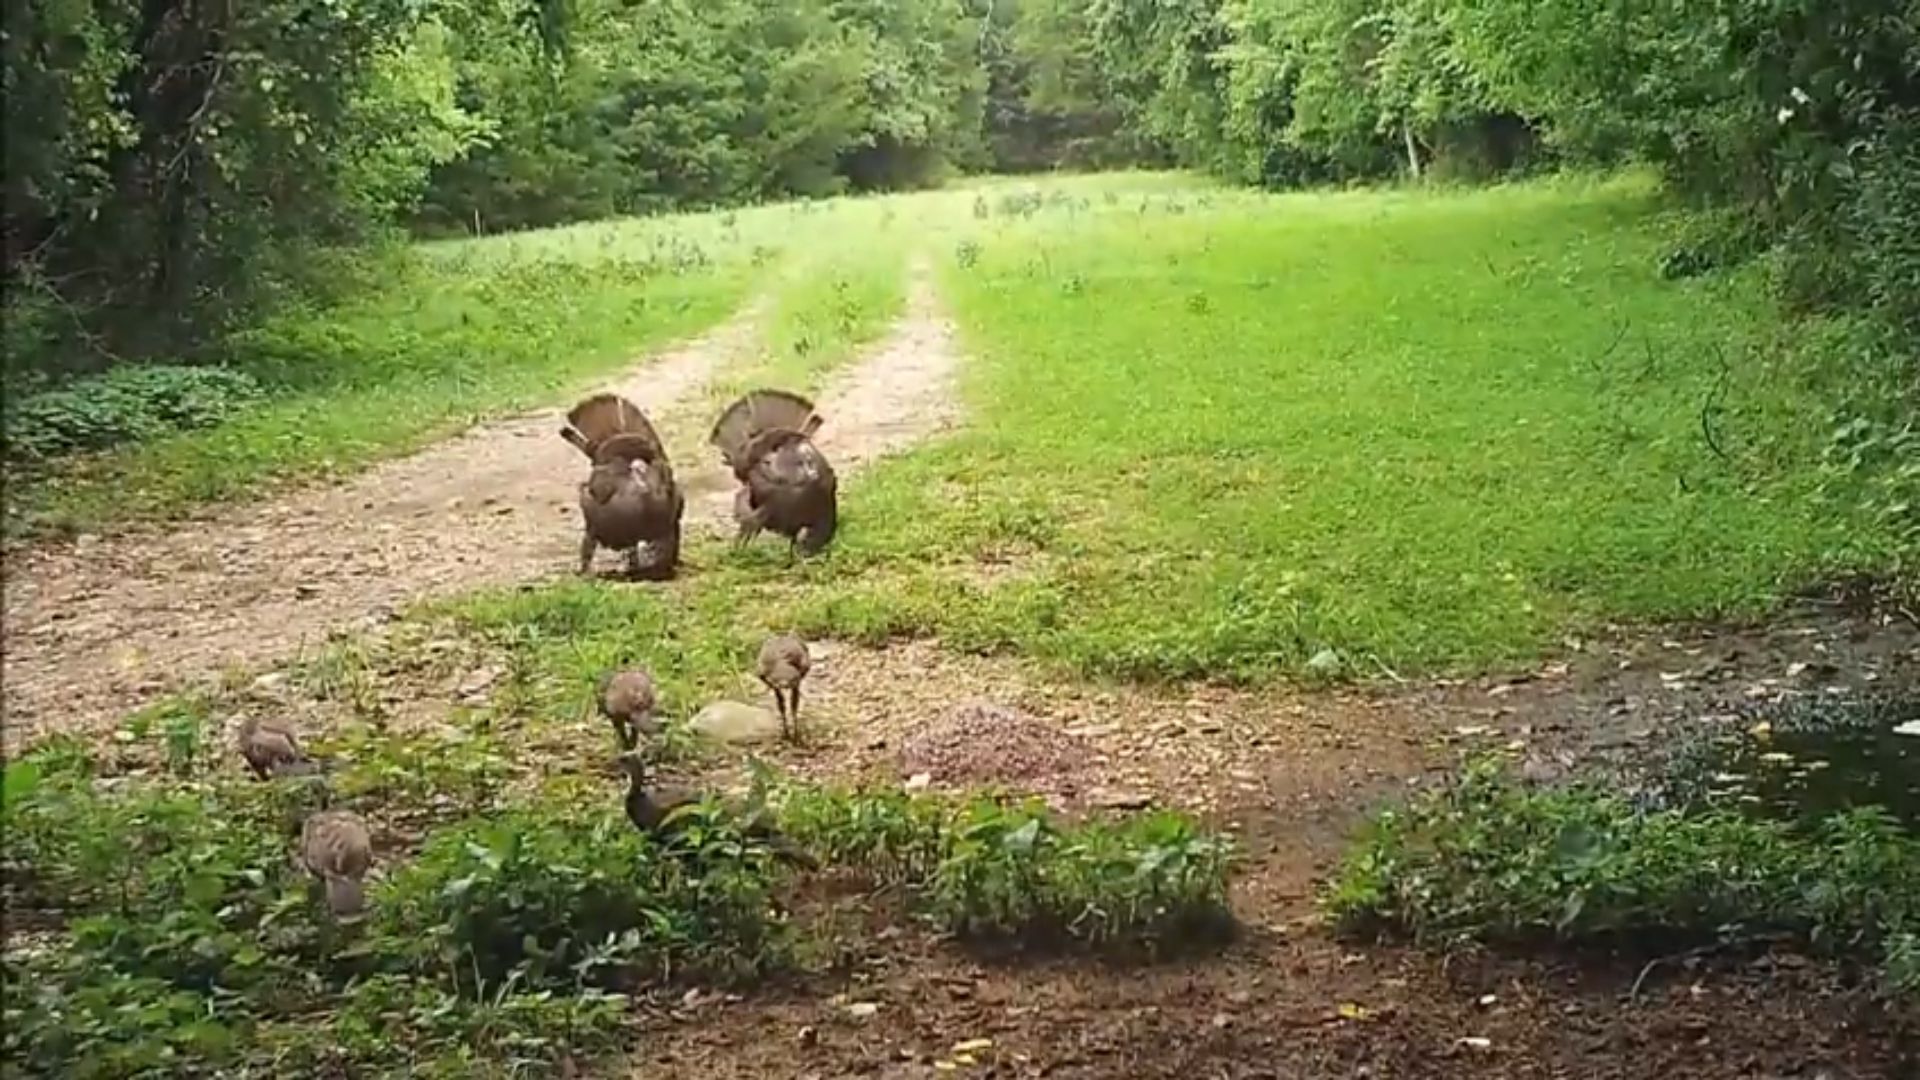 These poults are learning to strut.